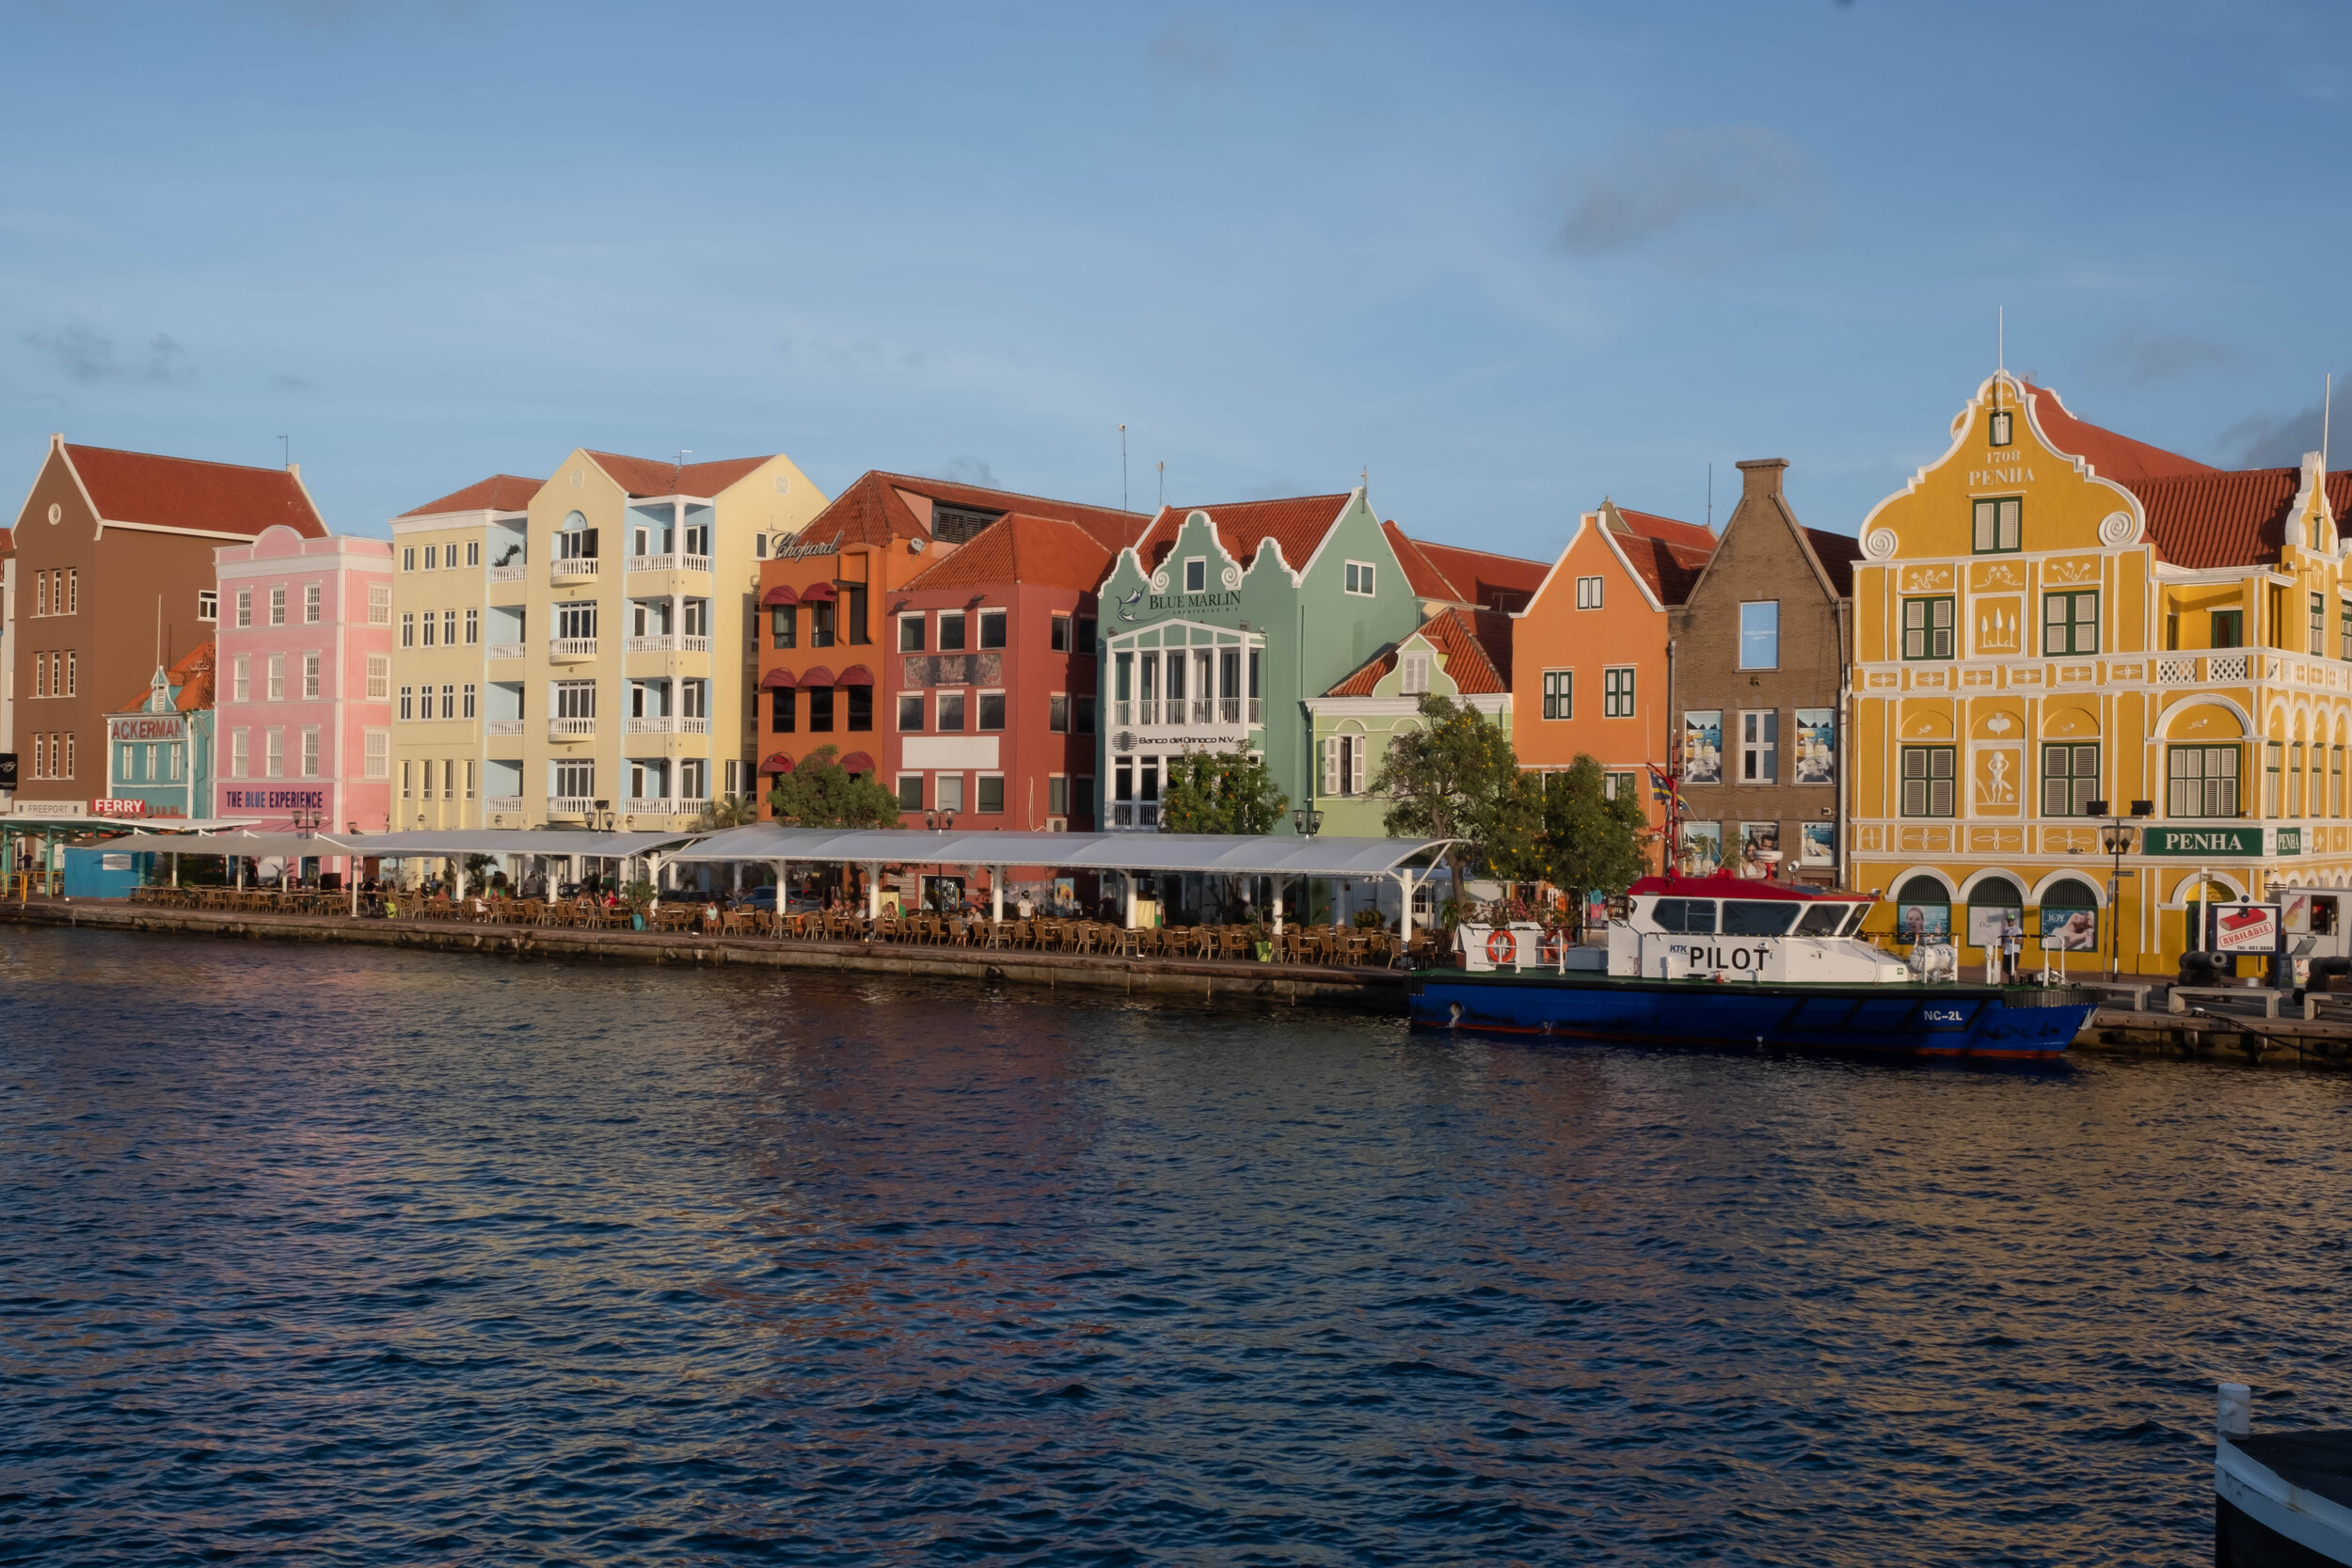 Curacao Island Travel Guide  LivingLesh - a luxe lifestyle blog